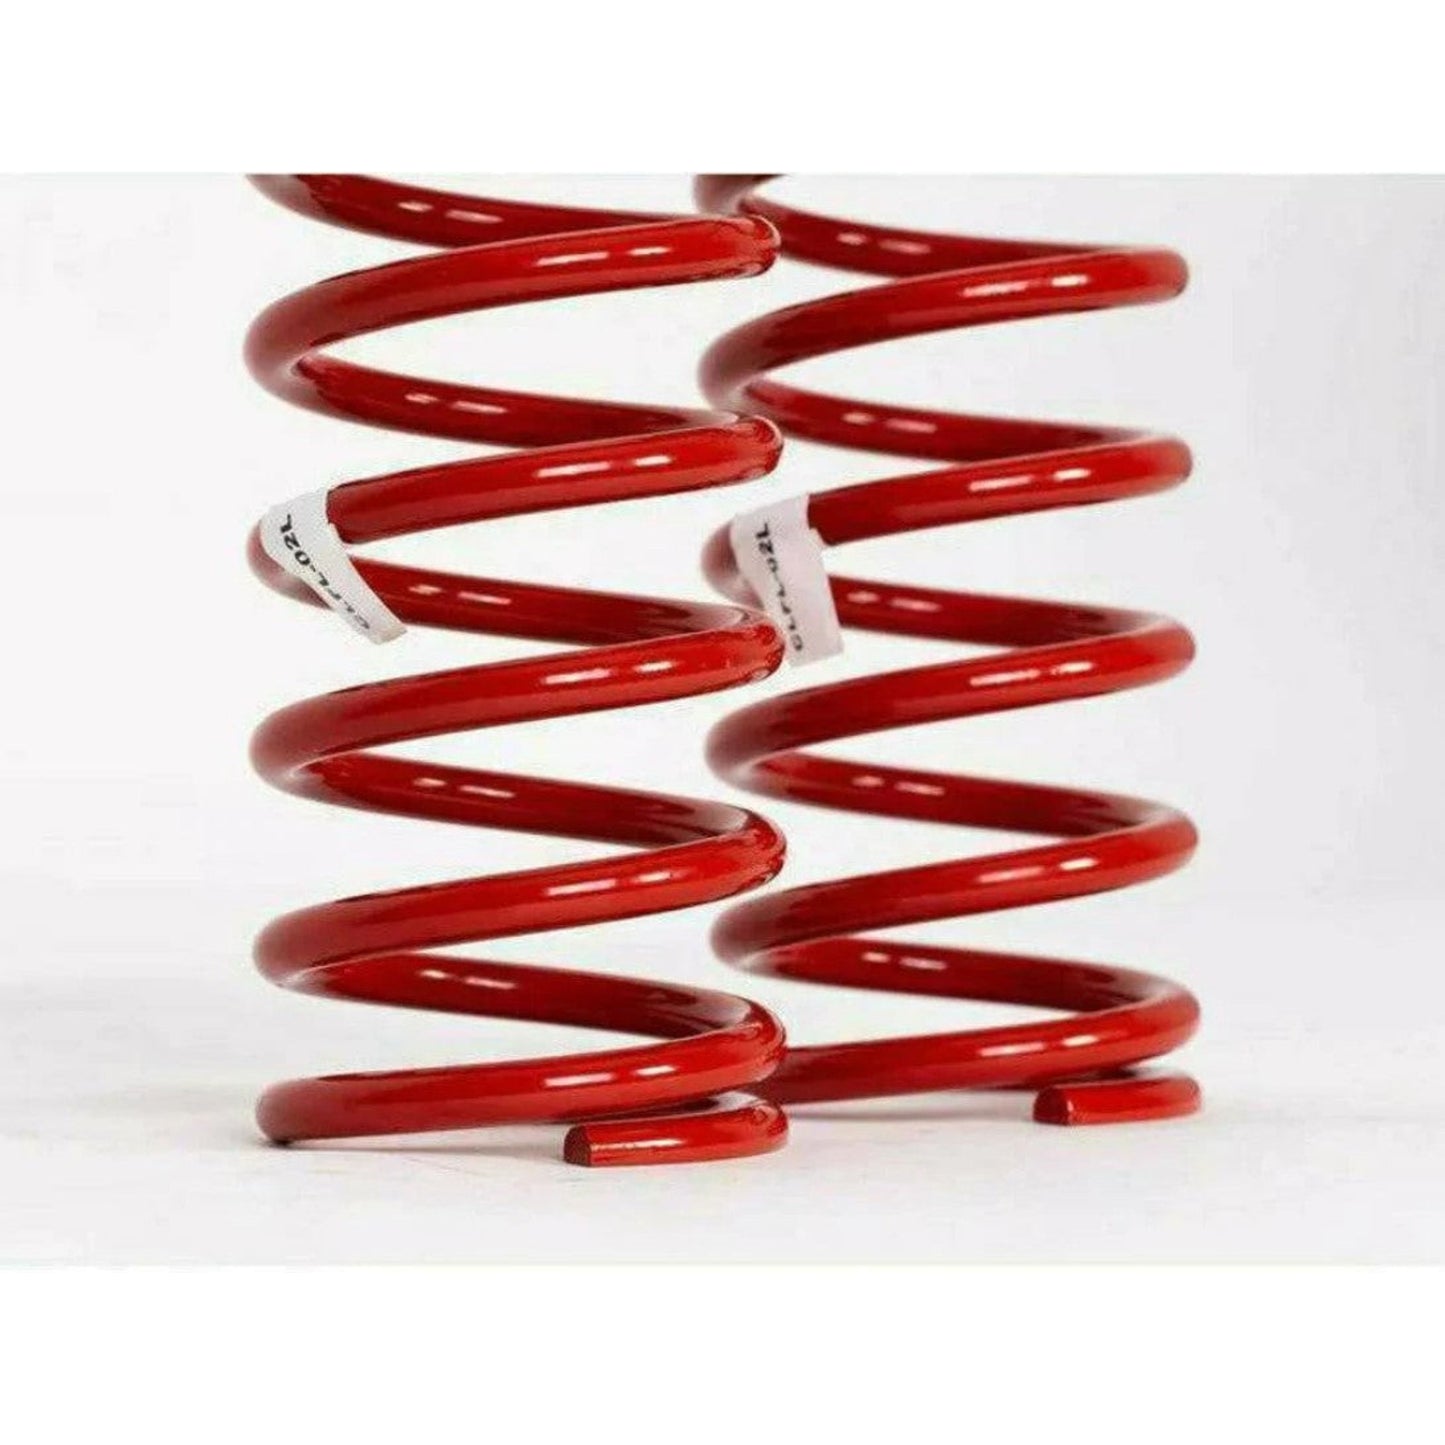 HYUNDAI SANTE FE CM (PARALLEL FRONT COIL WITH NO END SIZE REDUCTIONS) 2006-2008 Cobra Springs